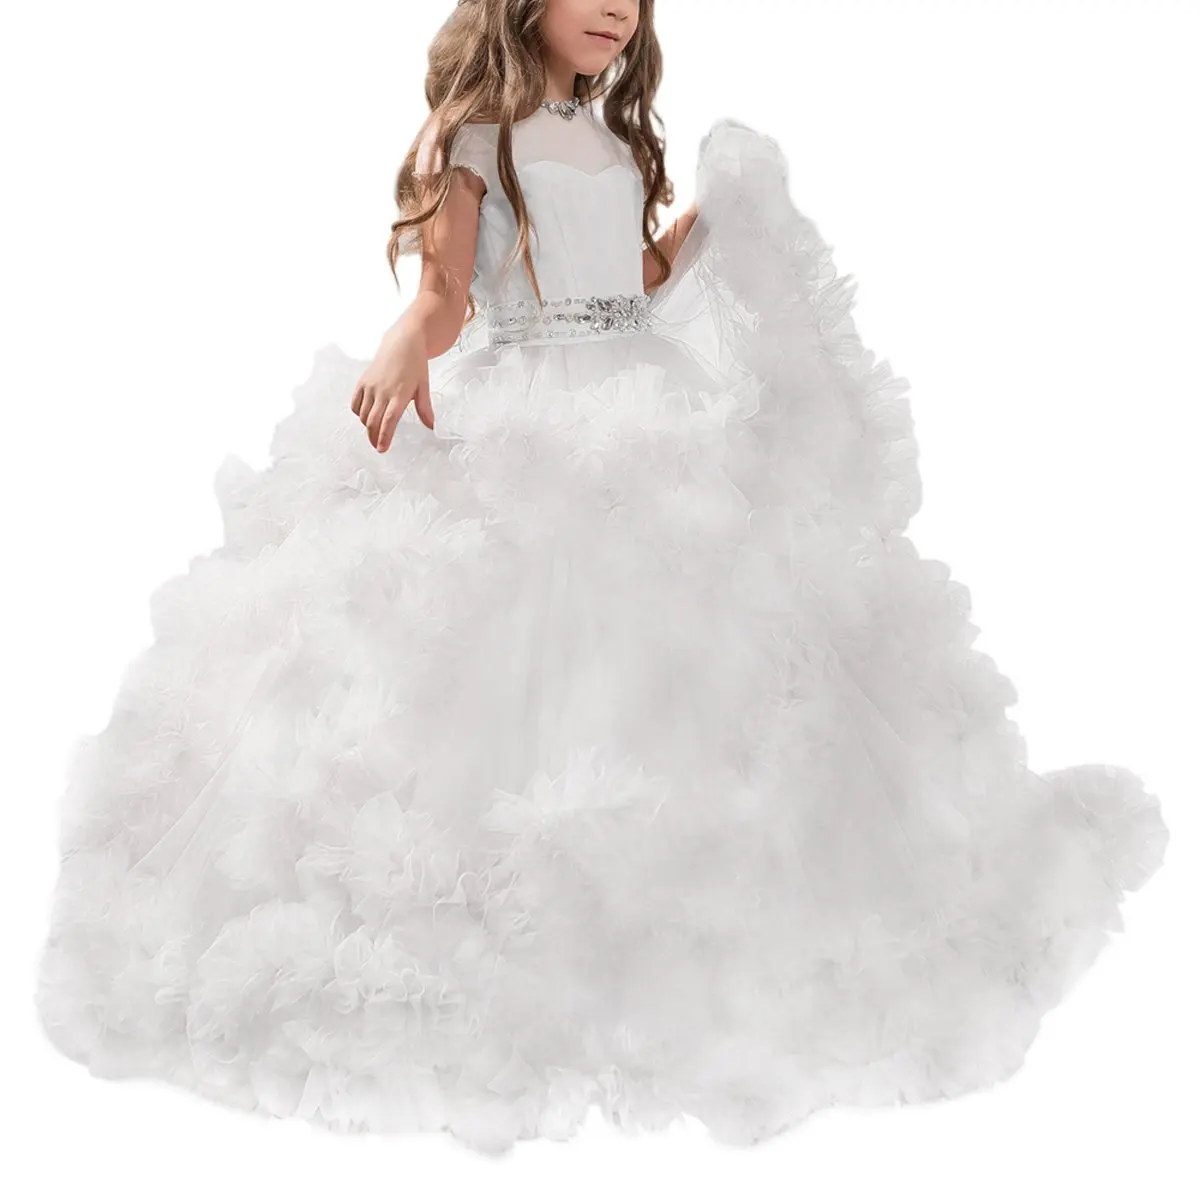  Stunning V-Back Luxury Pageant Tulle Ball Gowns for Girls 2-12  Year Old: Clothing, Shoes & Jewelry